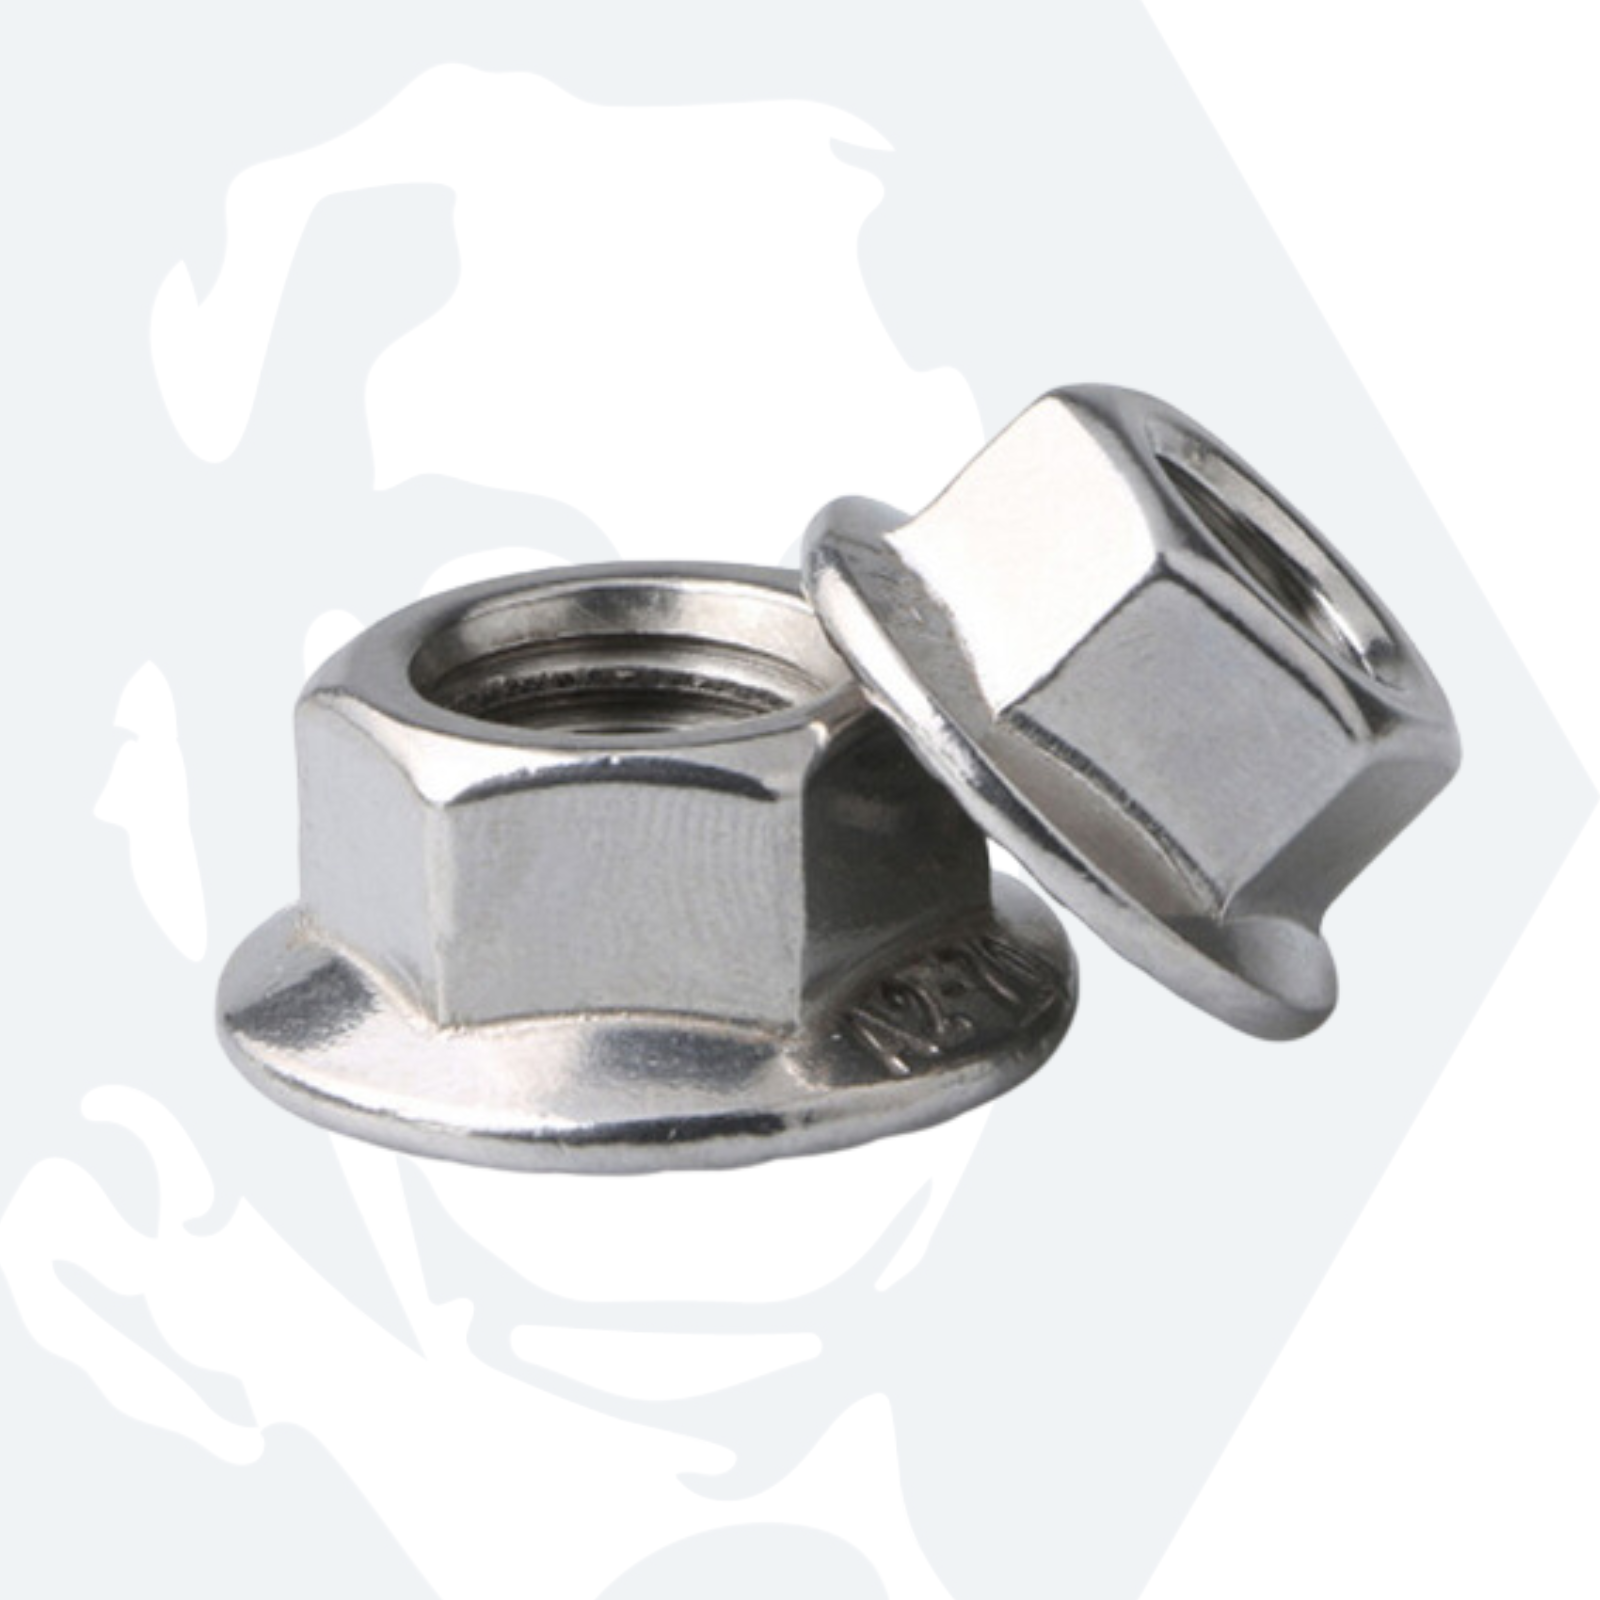 M12 Hexagon Flange Nut (DIN 6923) - Stainless Steel (A2)